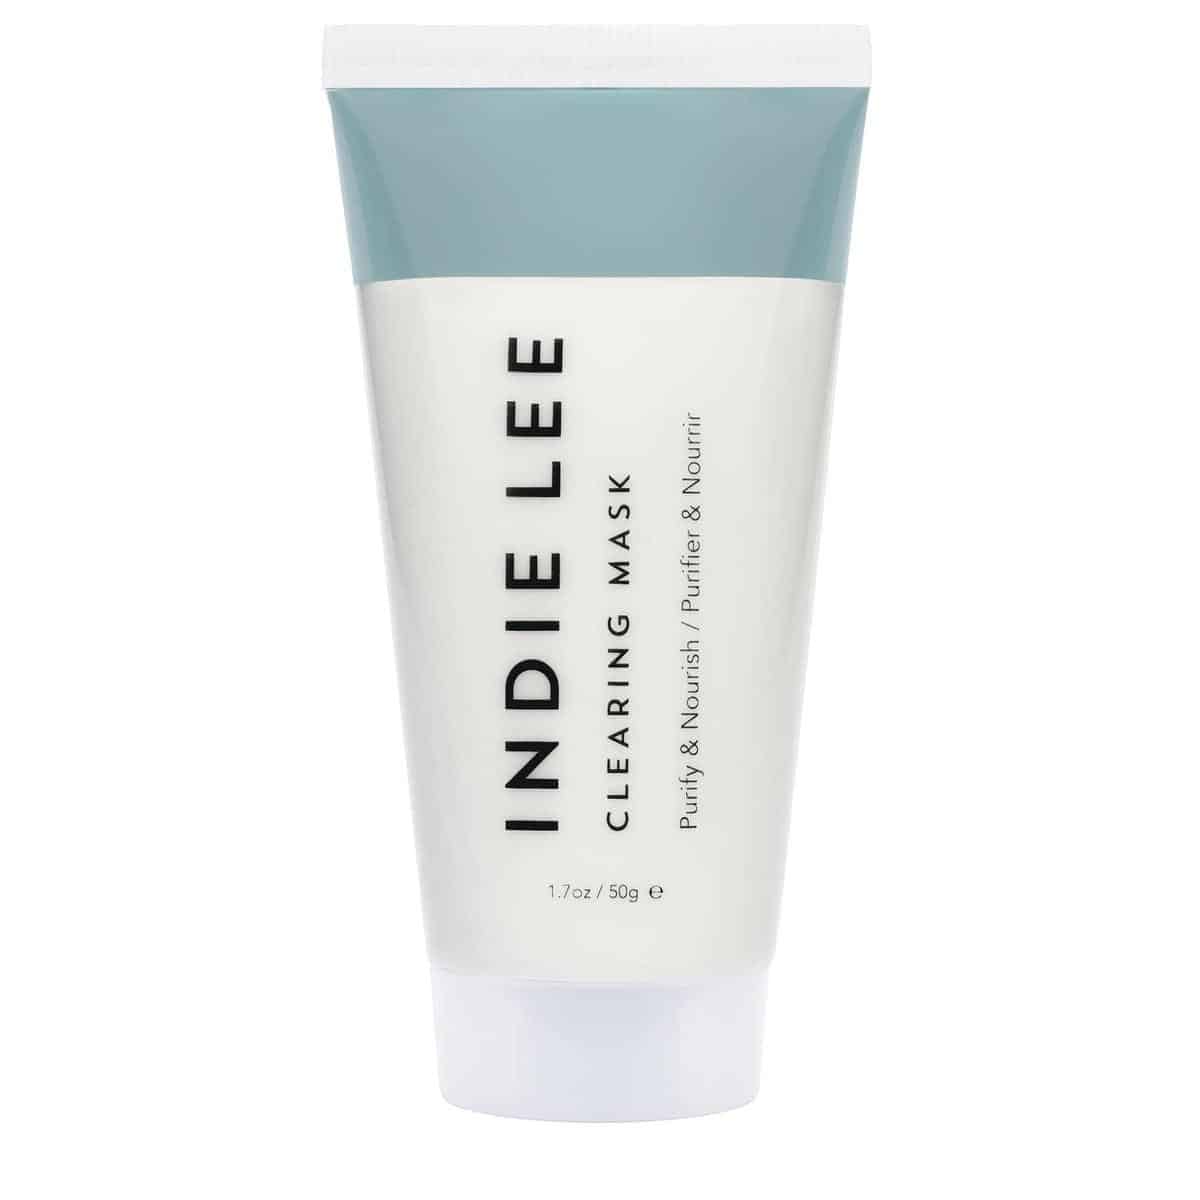 A tube of Indie Lee clearing face mask.